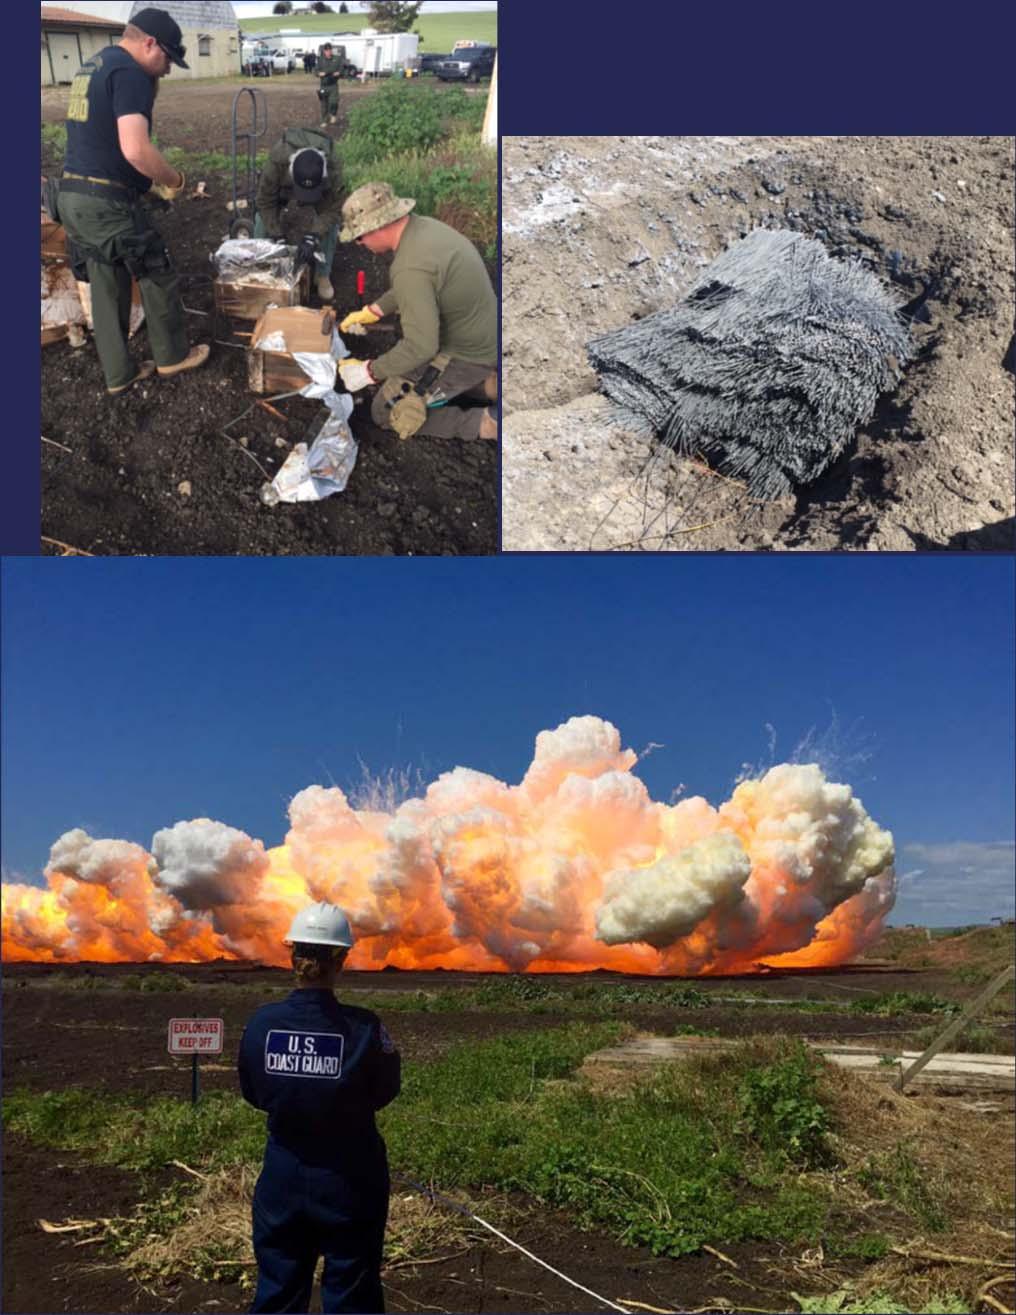 Hollister Explosive Detonation, CA OSC: EPA R9 April 11 15 Abandoned facility on 2 acres agricultural land, lapsed ATF permit.